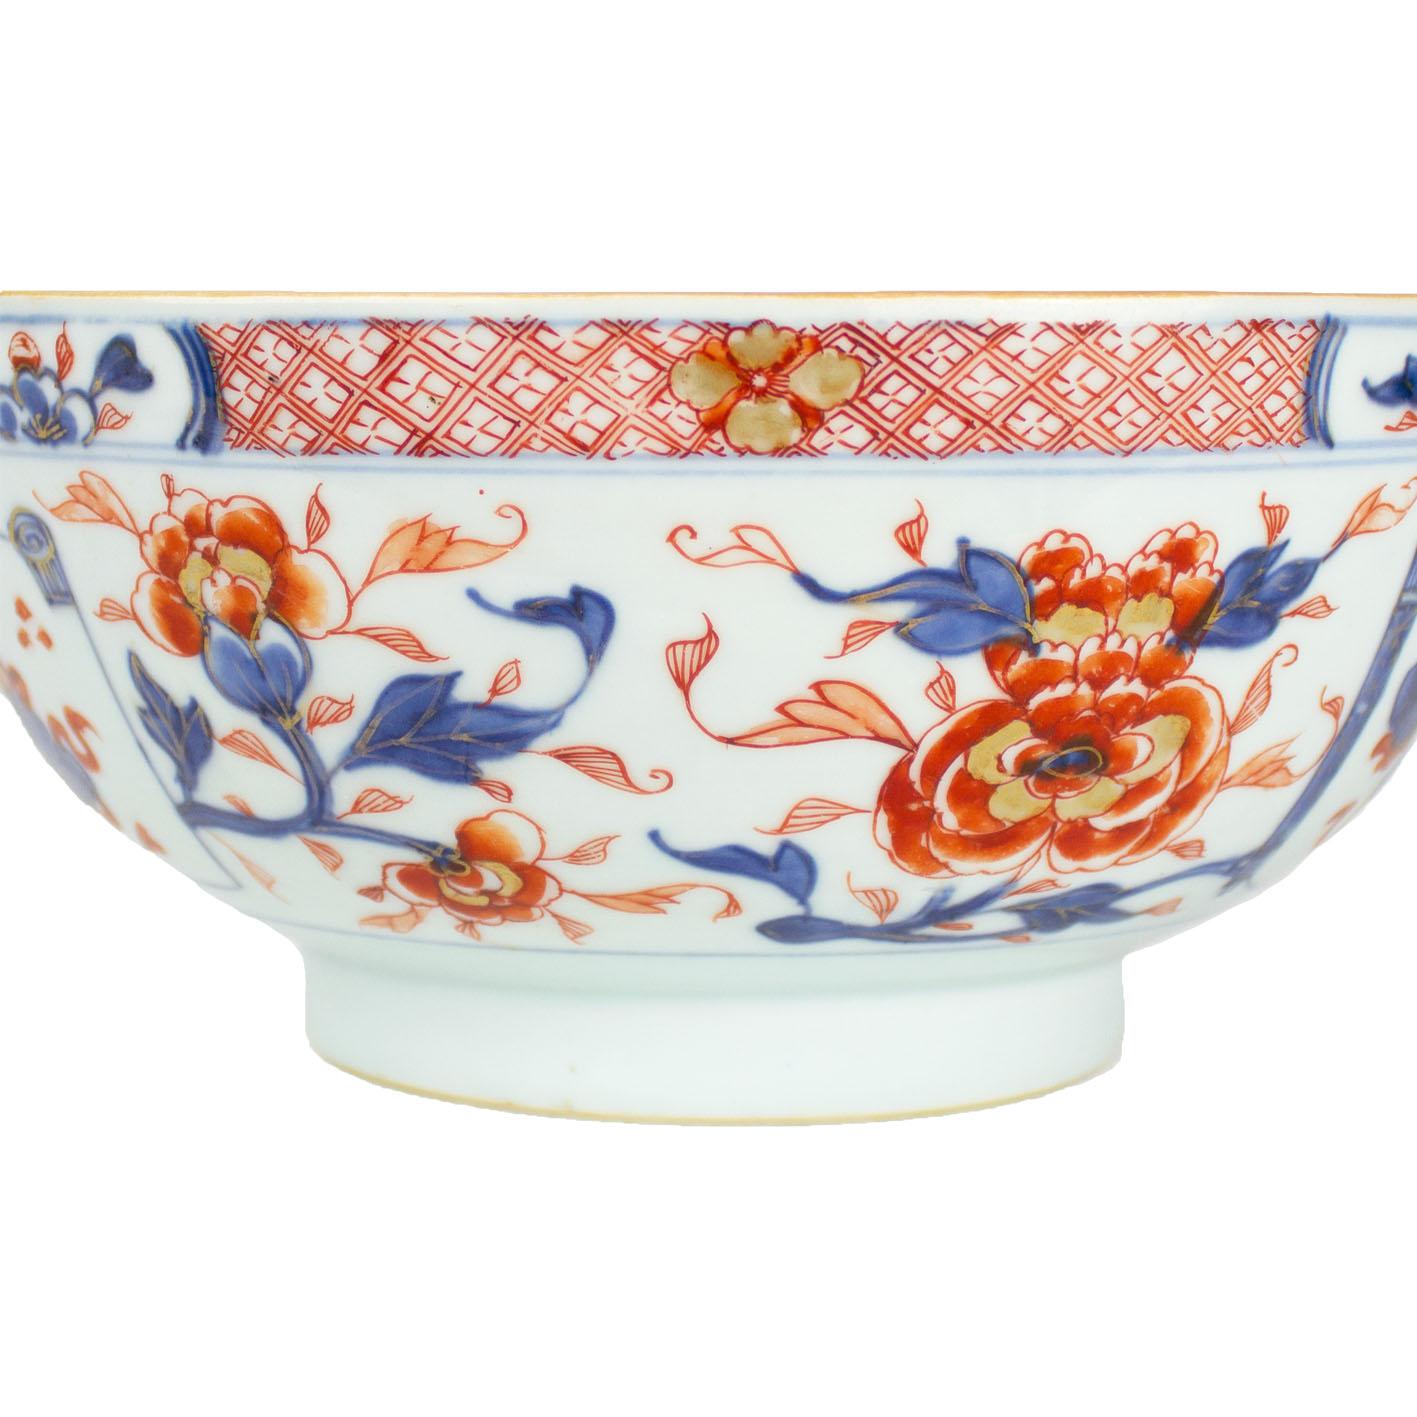 A Chinese porcelain bowl with rounded sides, East India Company, Qianlong period (1736-1795). Imari decoration with underglaze blue, rouge-de-fer and touches of gilt enamels. Both inside and outside rim are decorated with four reserves containing